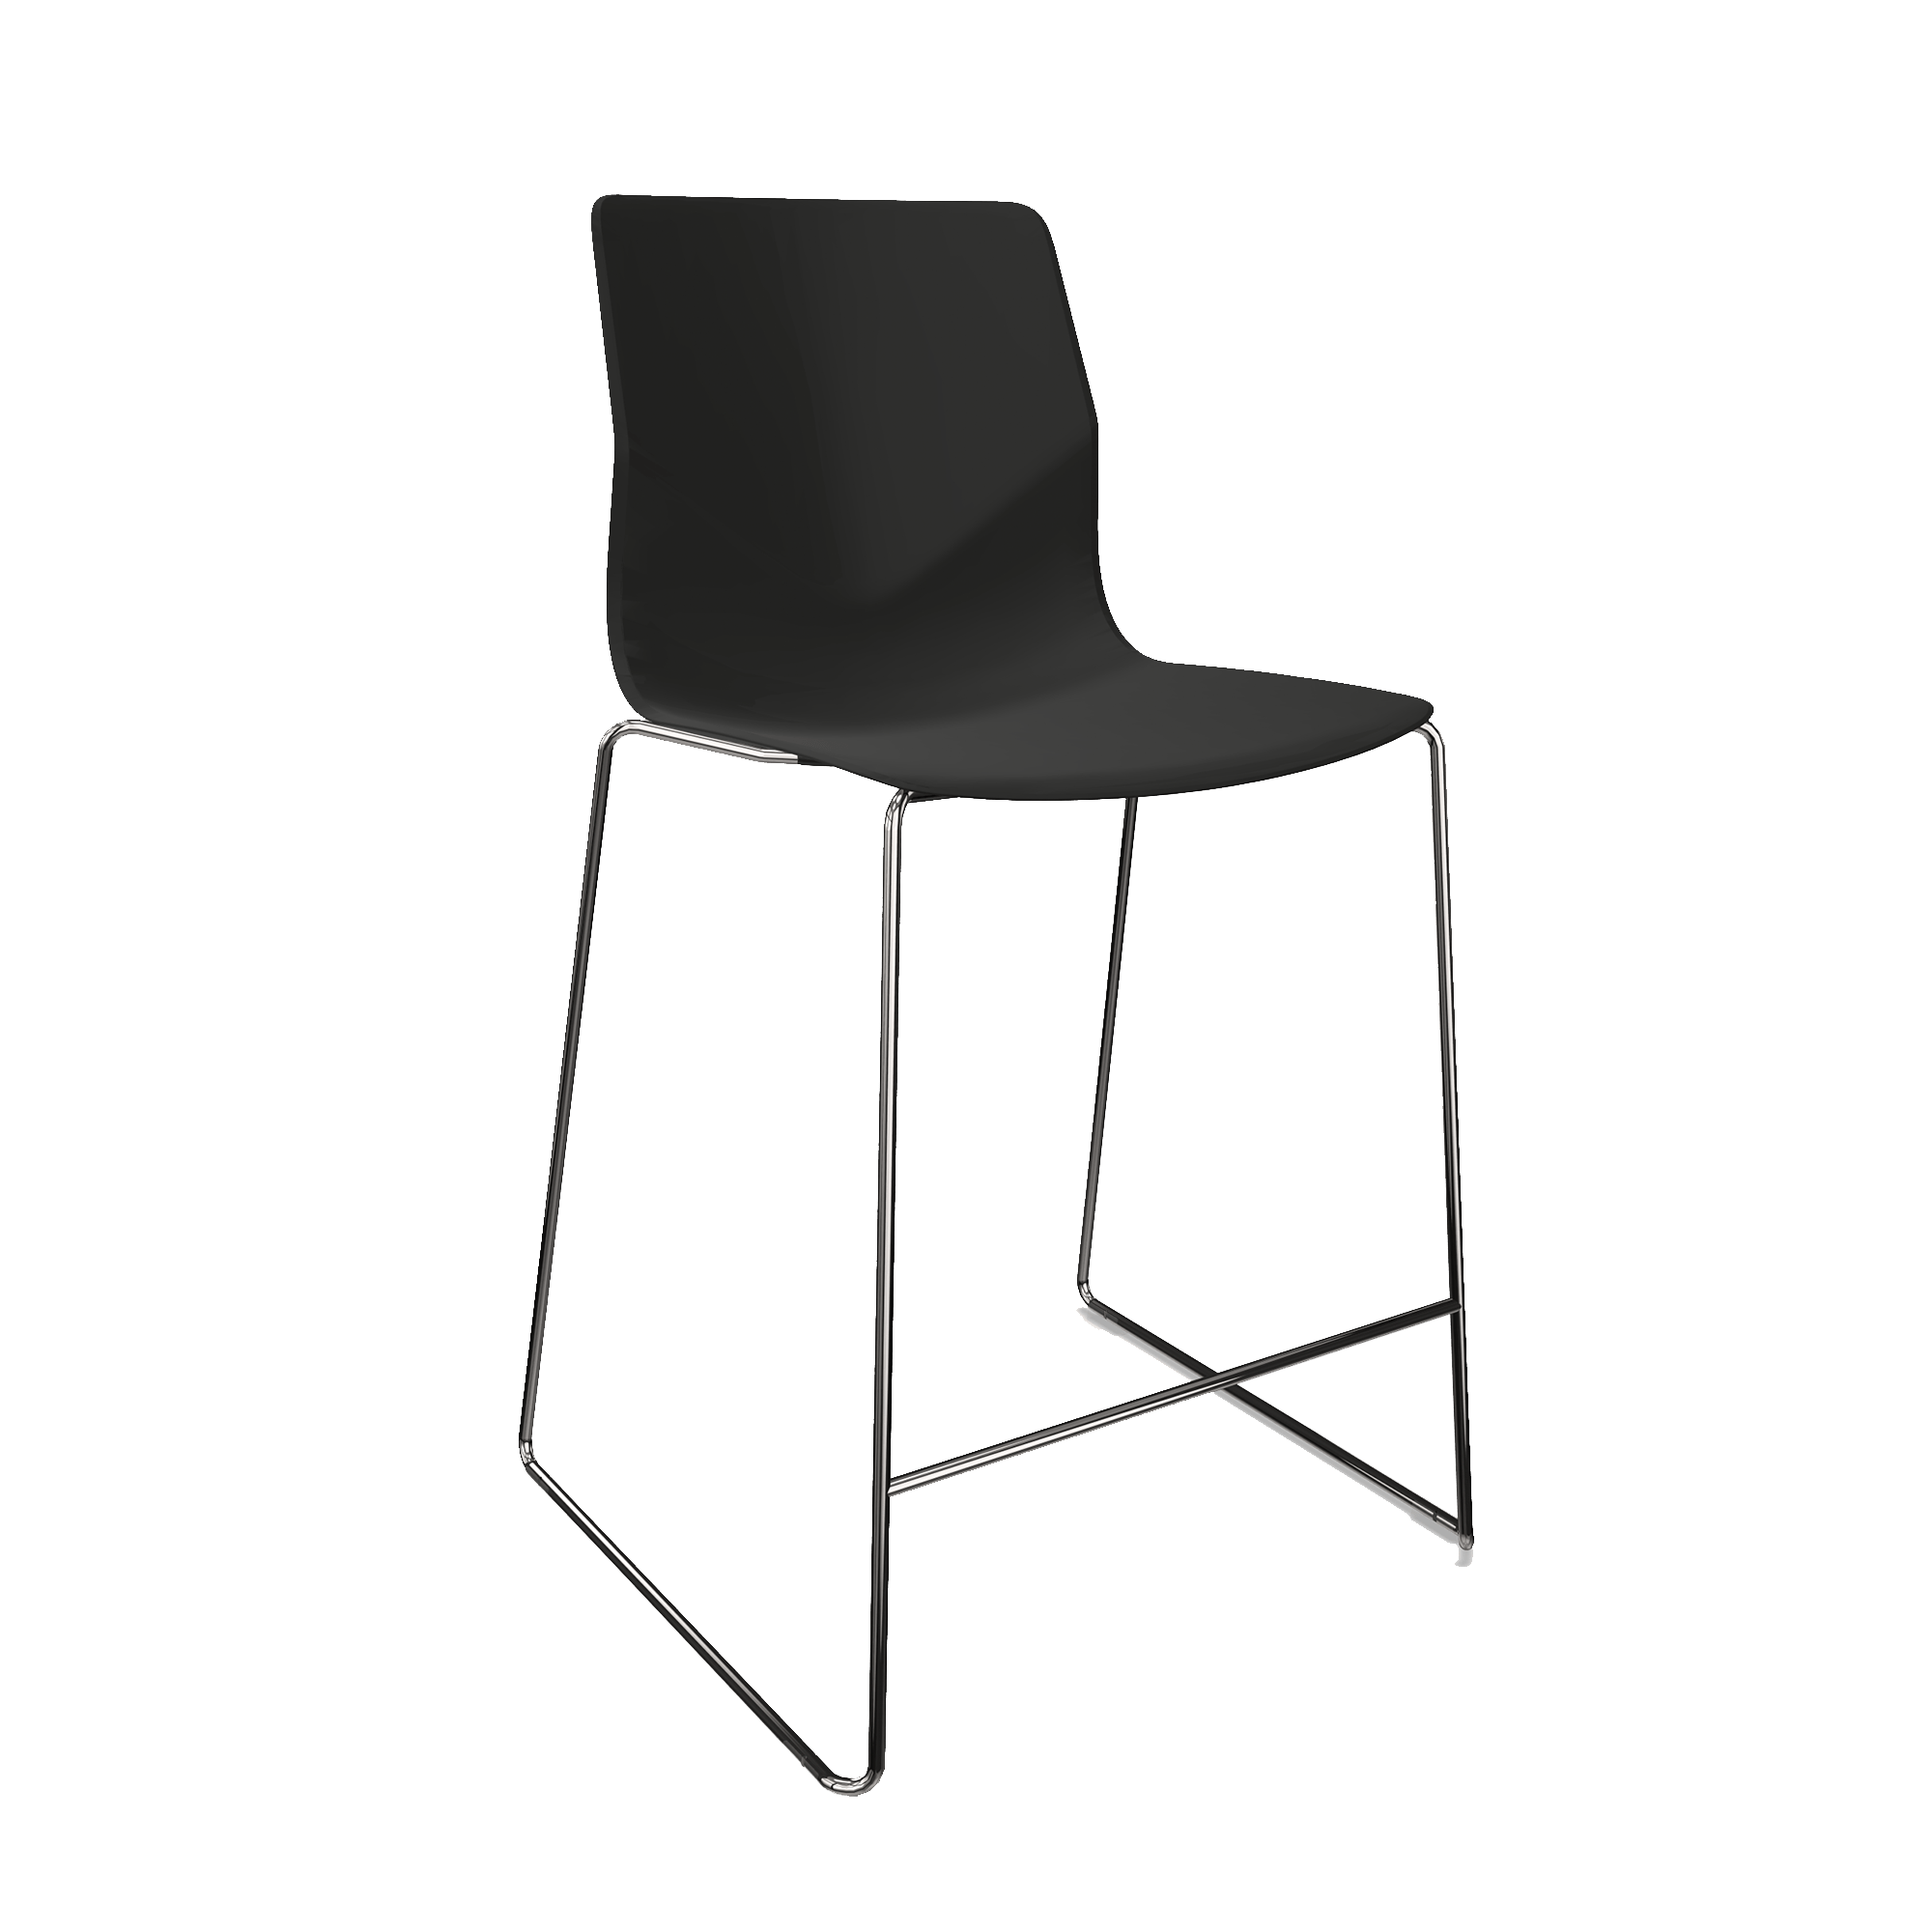 A black mid height counter chair with 2 chrome legs